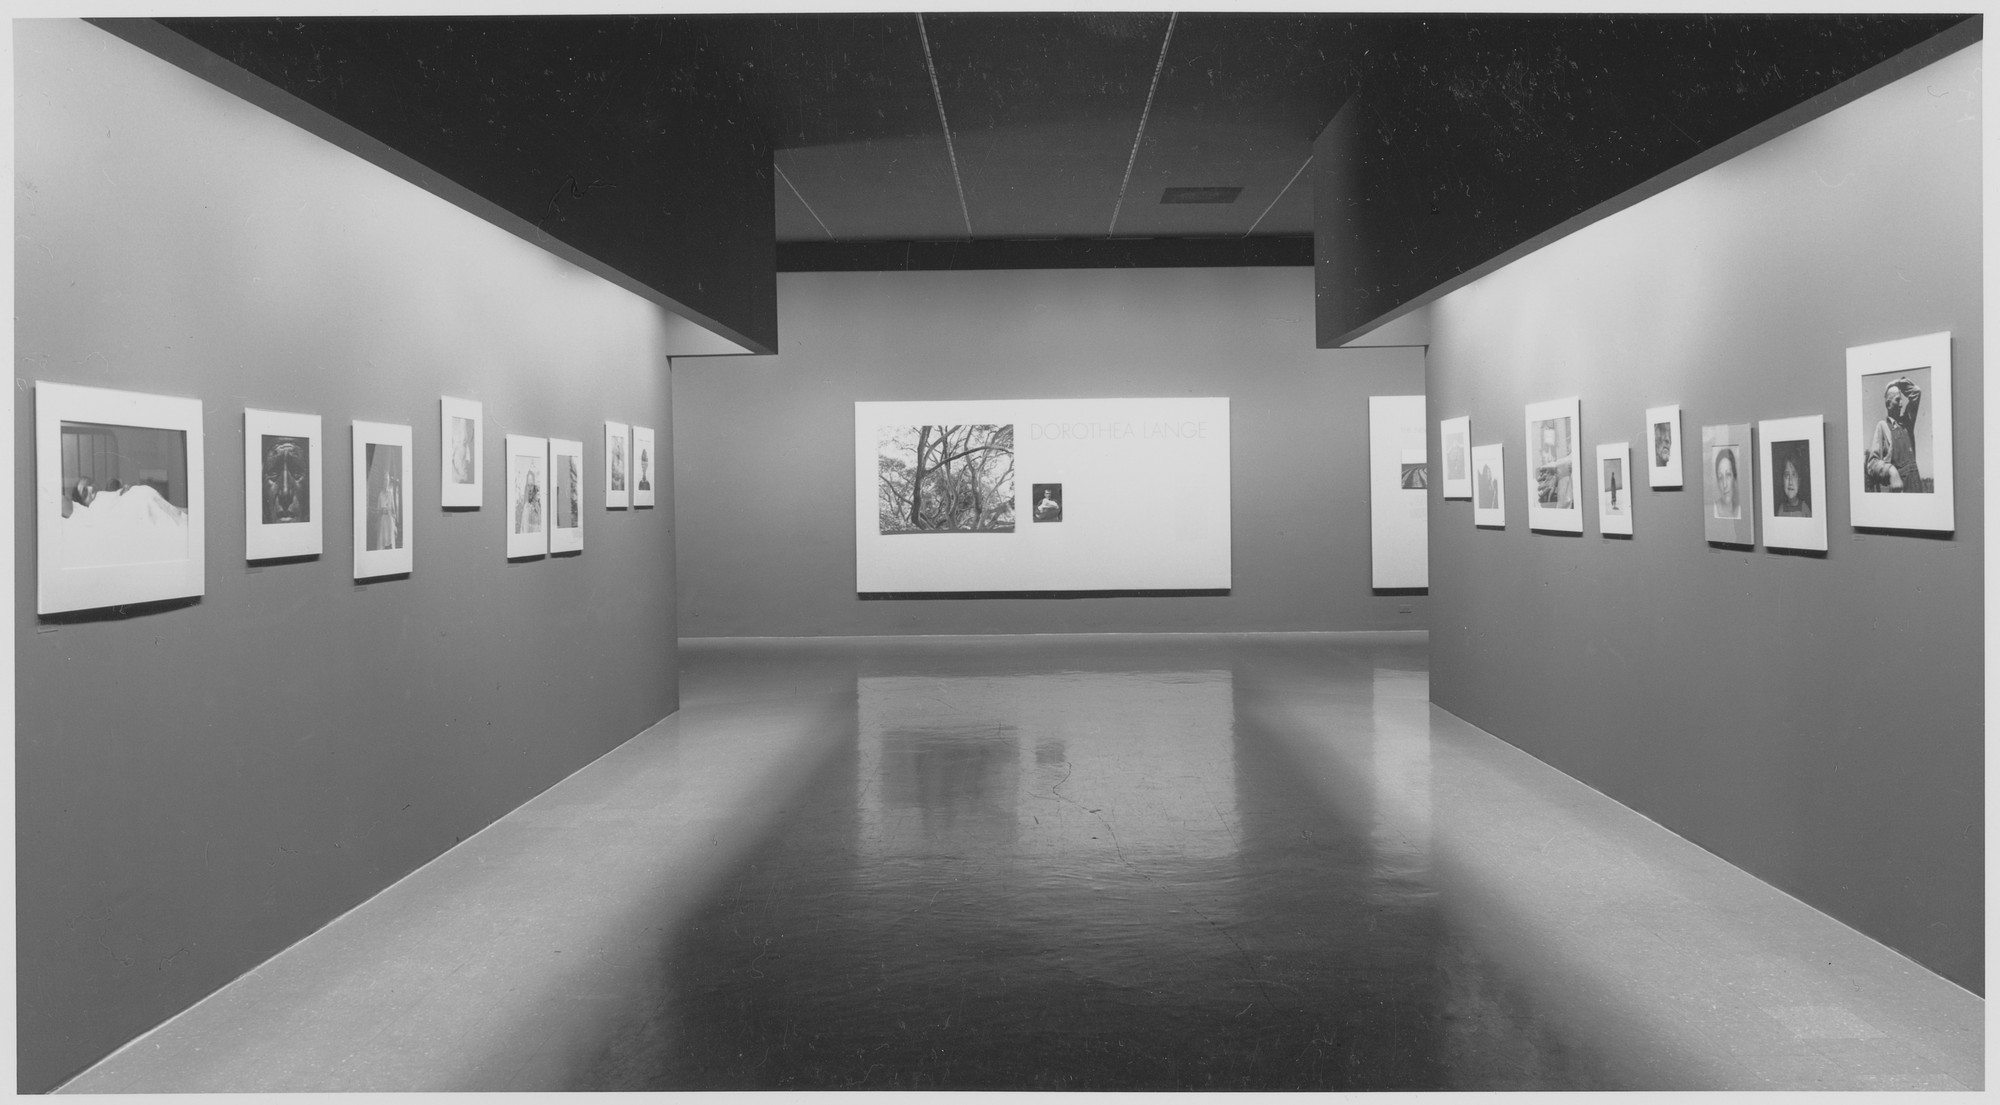 Installation view of the exhibition "Dorothea Lange." MoMA